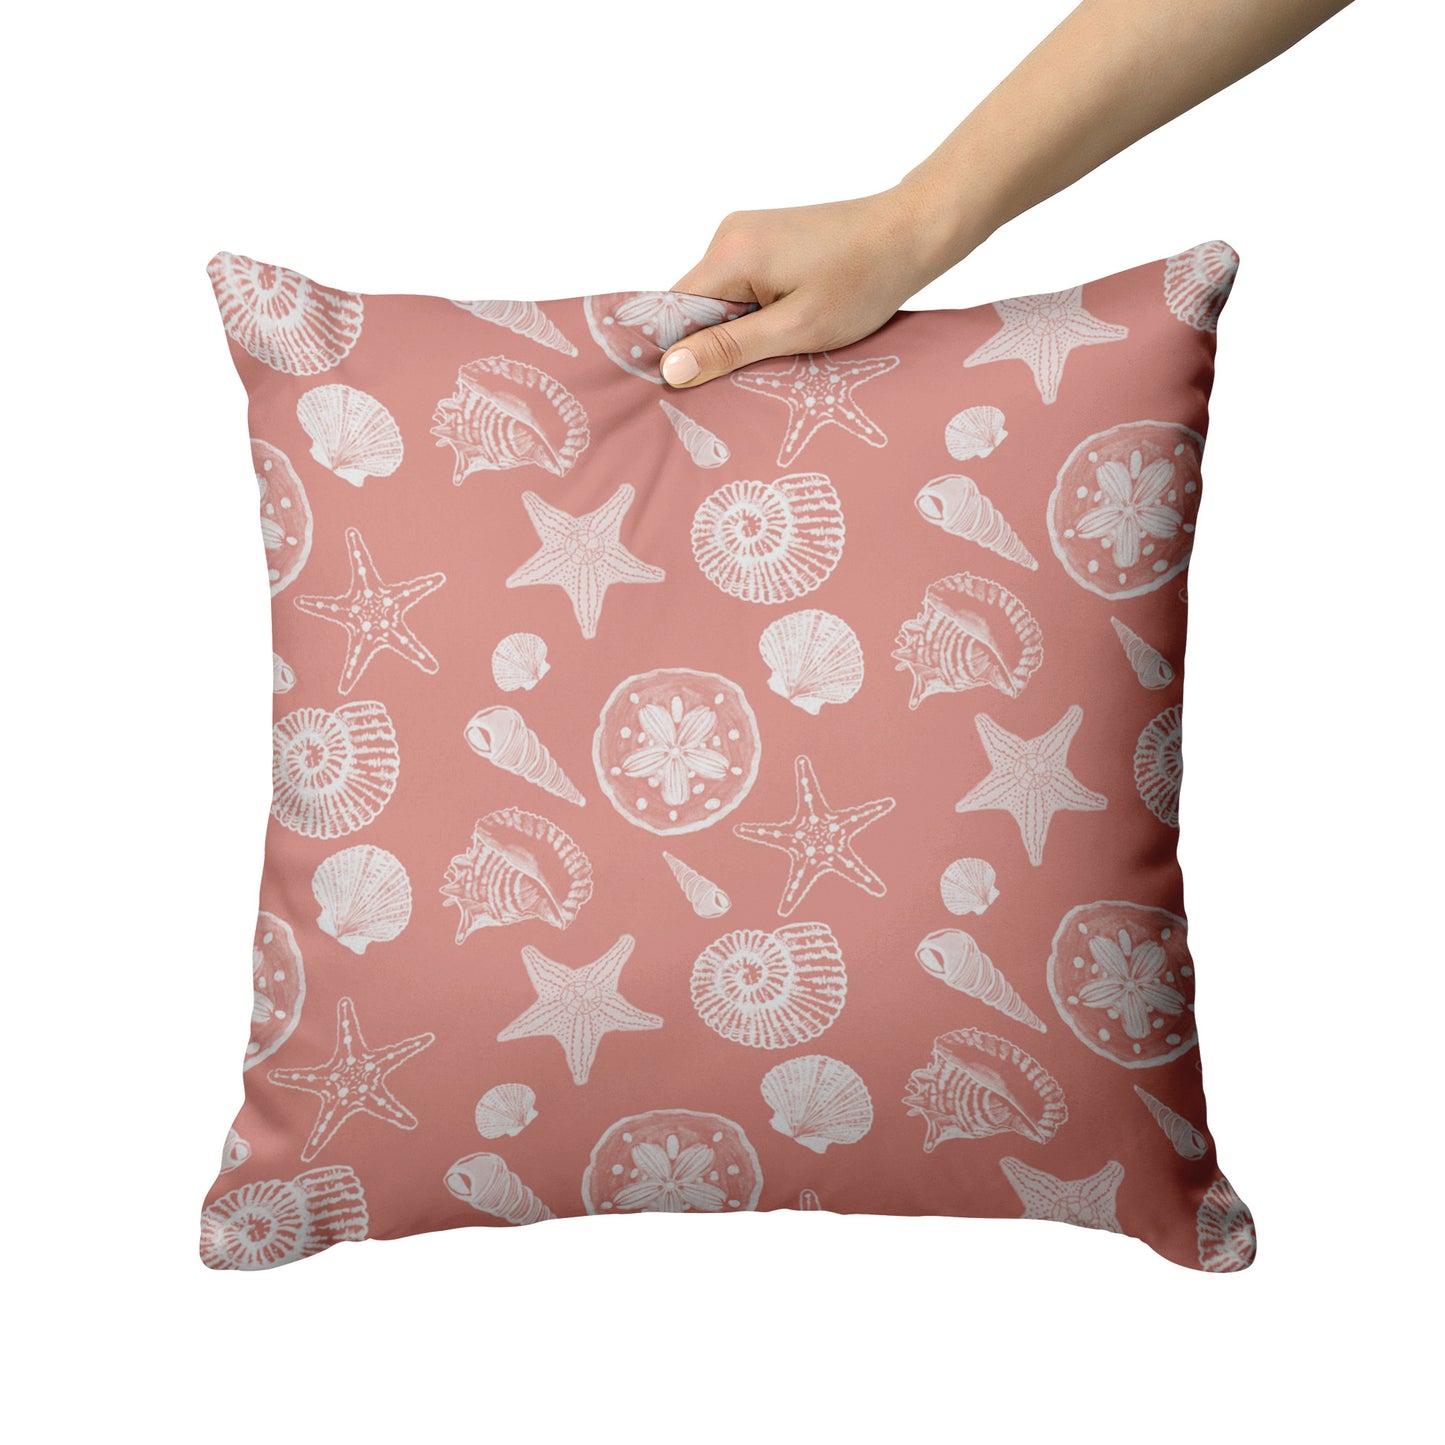 Seashell Sketches on Coral Background, Throw Pillow